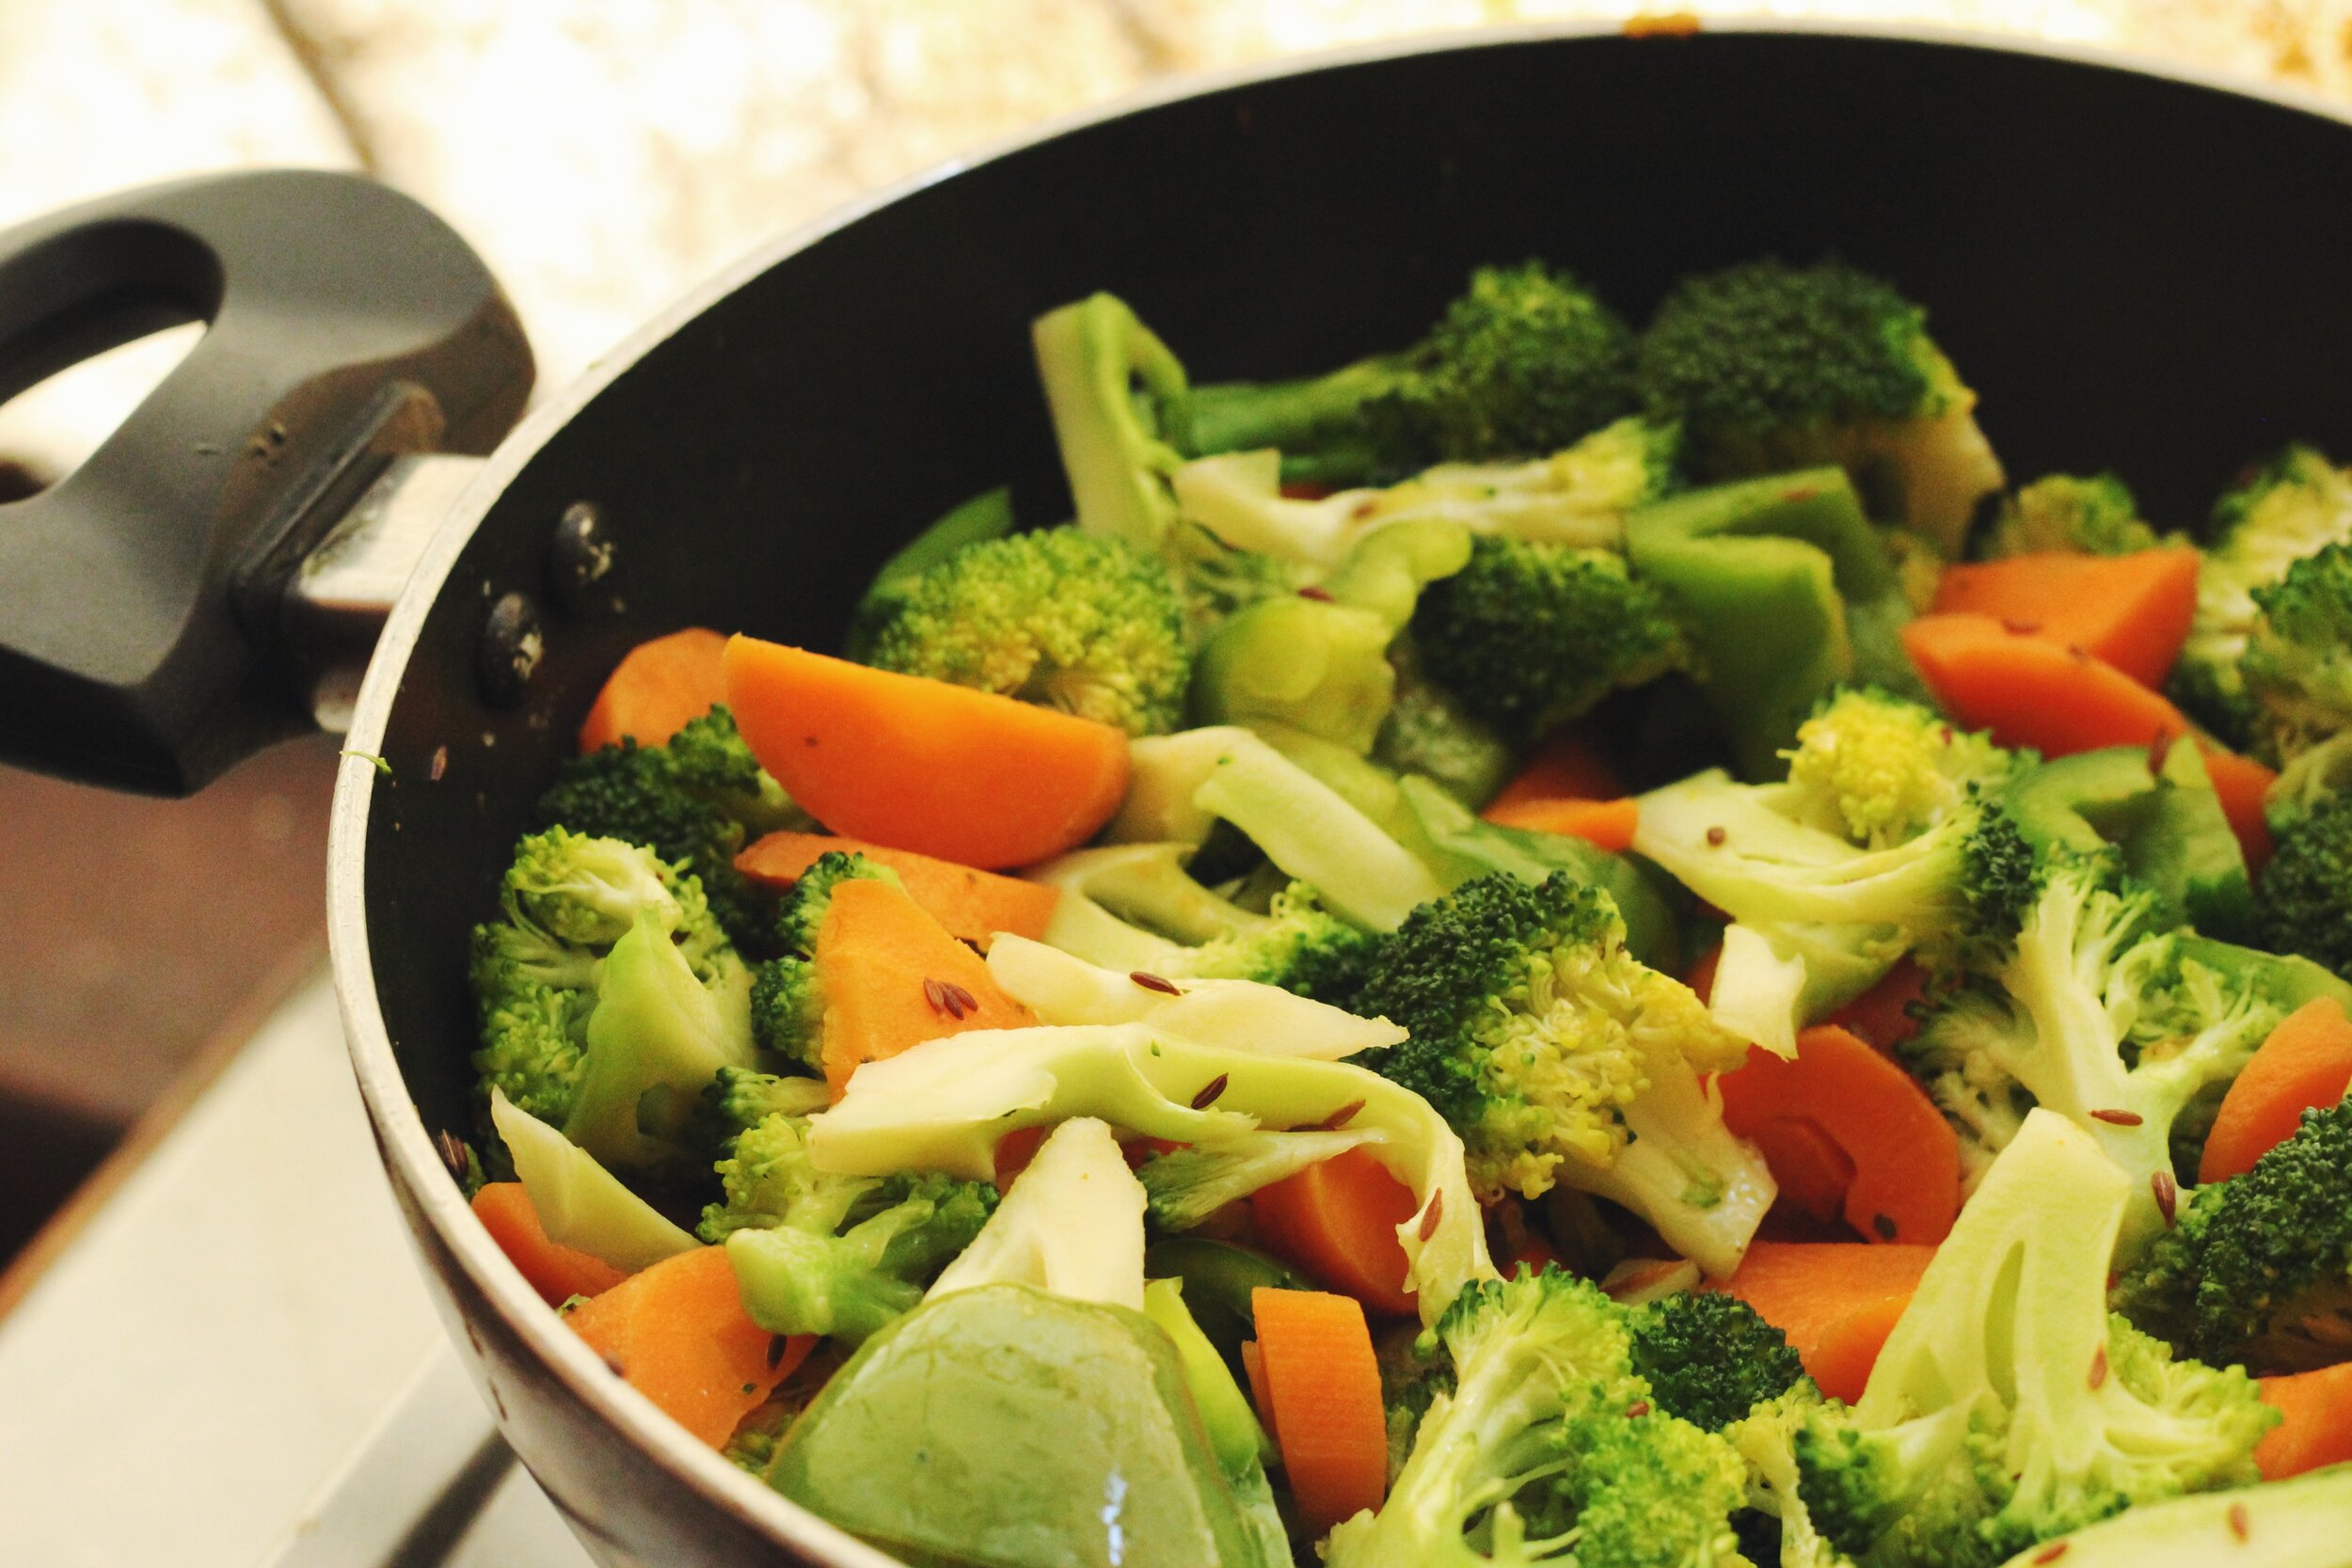 Broccoli is wonderful in stir fry with other spring vegetables. Photo by Ravi Sharma